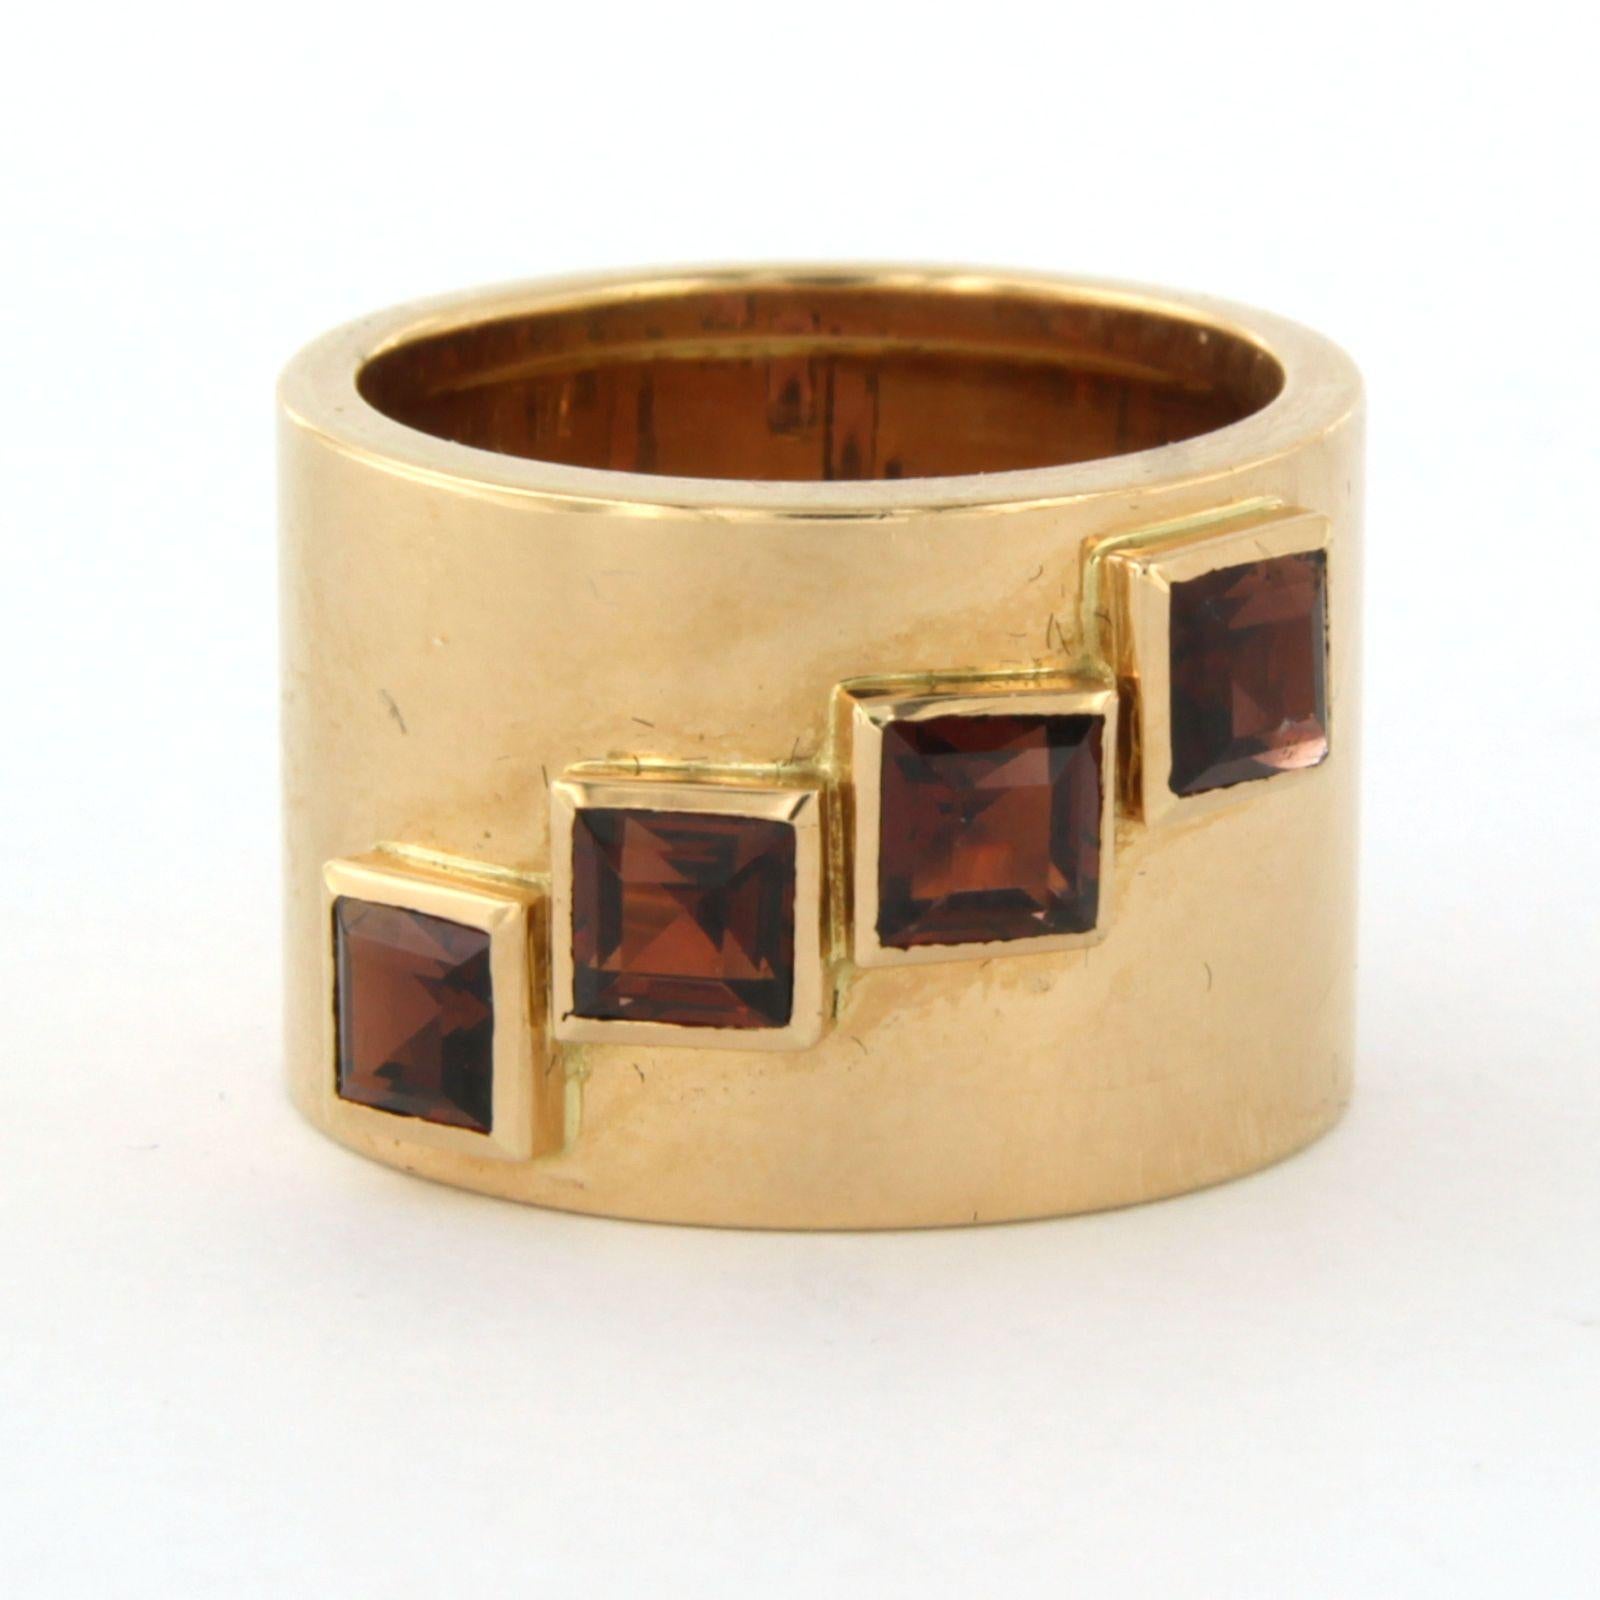 14kt pink gold band ring set with tourmaline - ring size U.S. 5.25 - EU. 16 (50)

detailed description

the front of the ring is 1.3 cm wide

weight: 9.3 gr

The gold content is slightly lower than 18 carat gold, for this reason hallmarked by